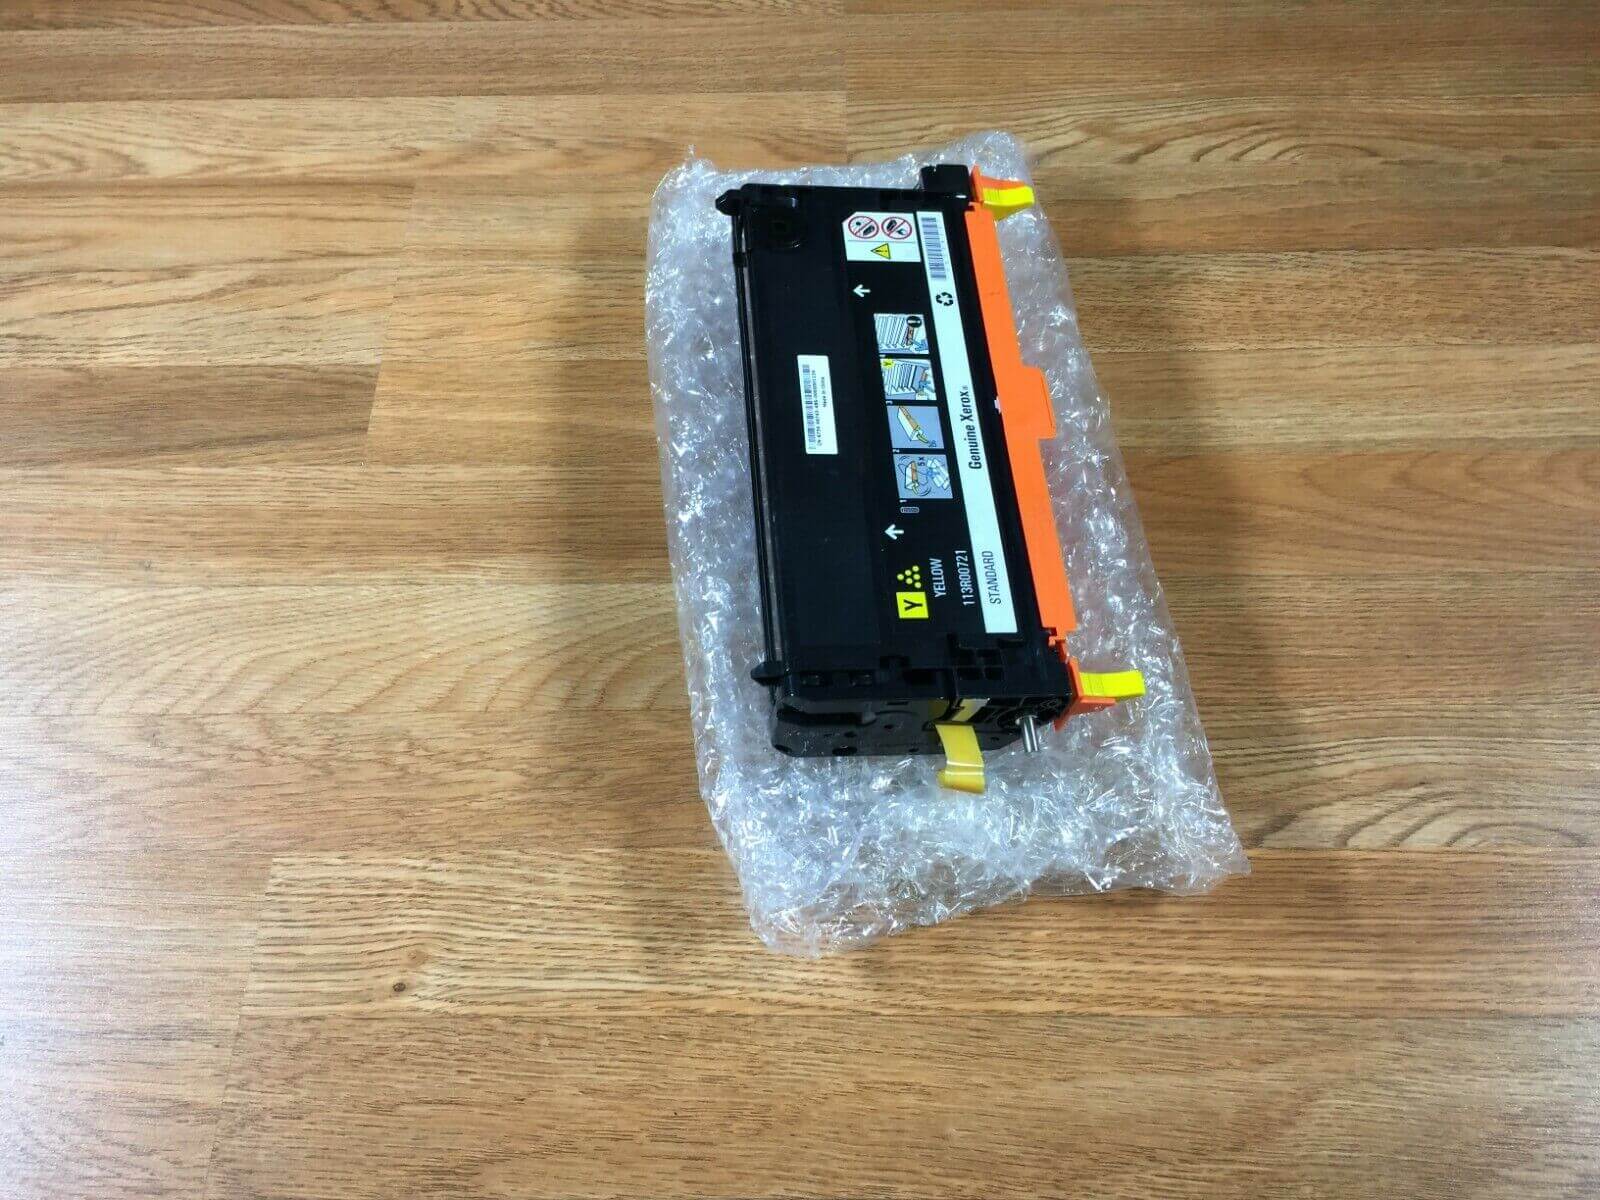 New No Box - GENUINE Xerox Phaser 6180 Yellow Toner 113R00721 -FedEx 2Day Air!! - copier-clearance-center